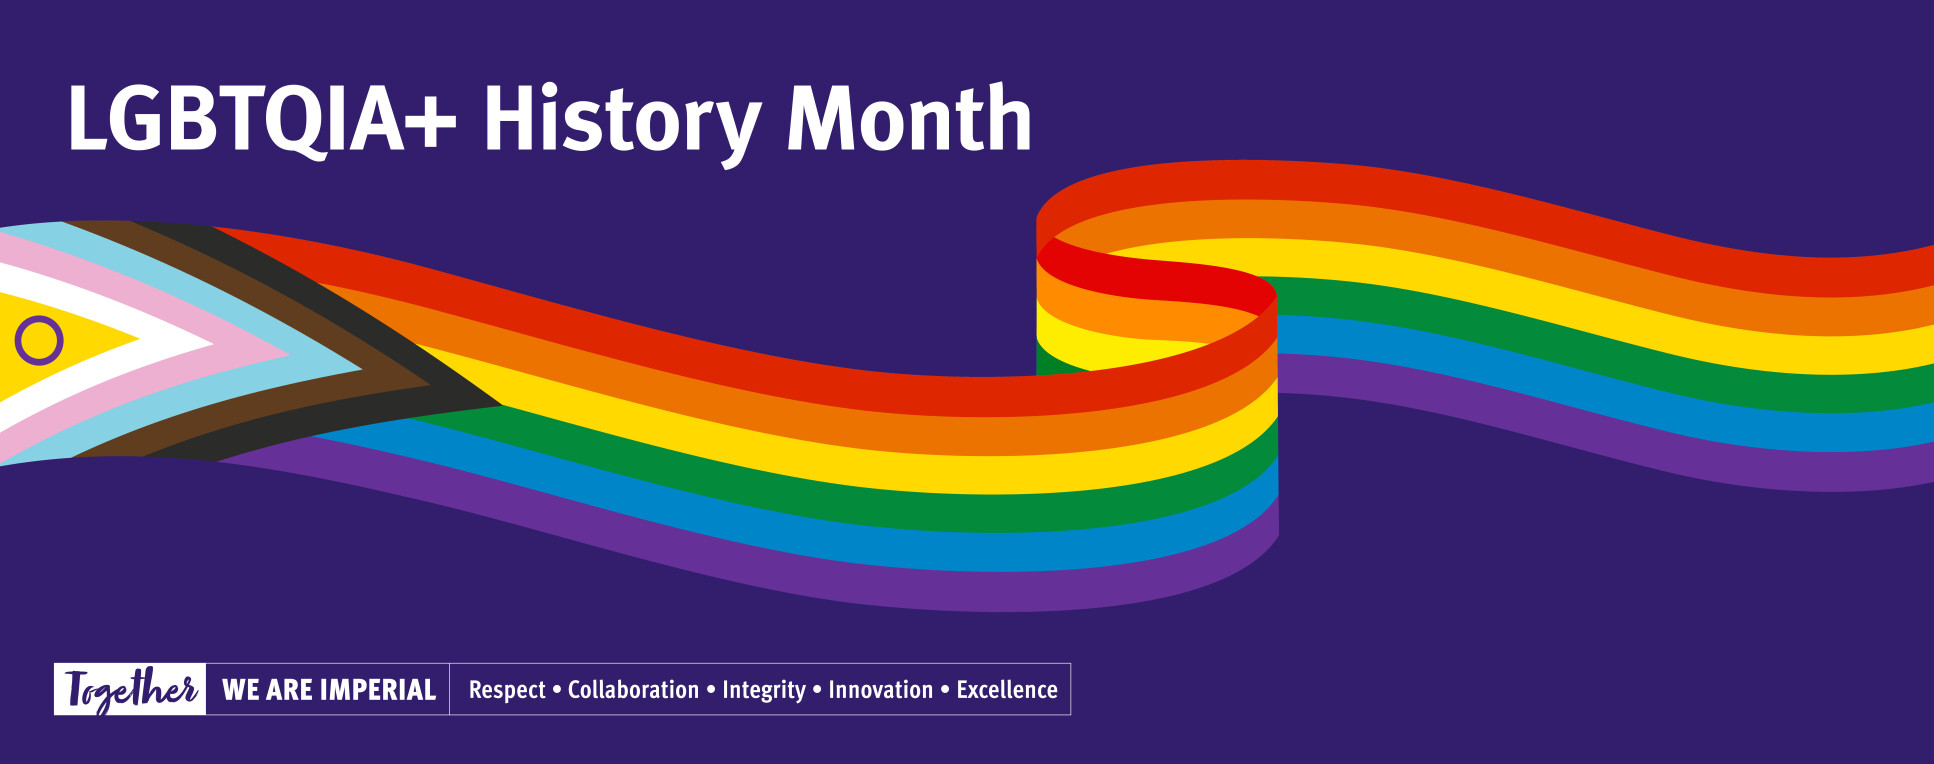 LGBTQIA+ History Month, Pride progress flag, and list of Imperial's values